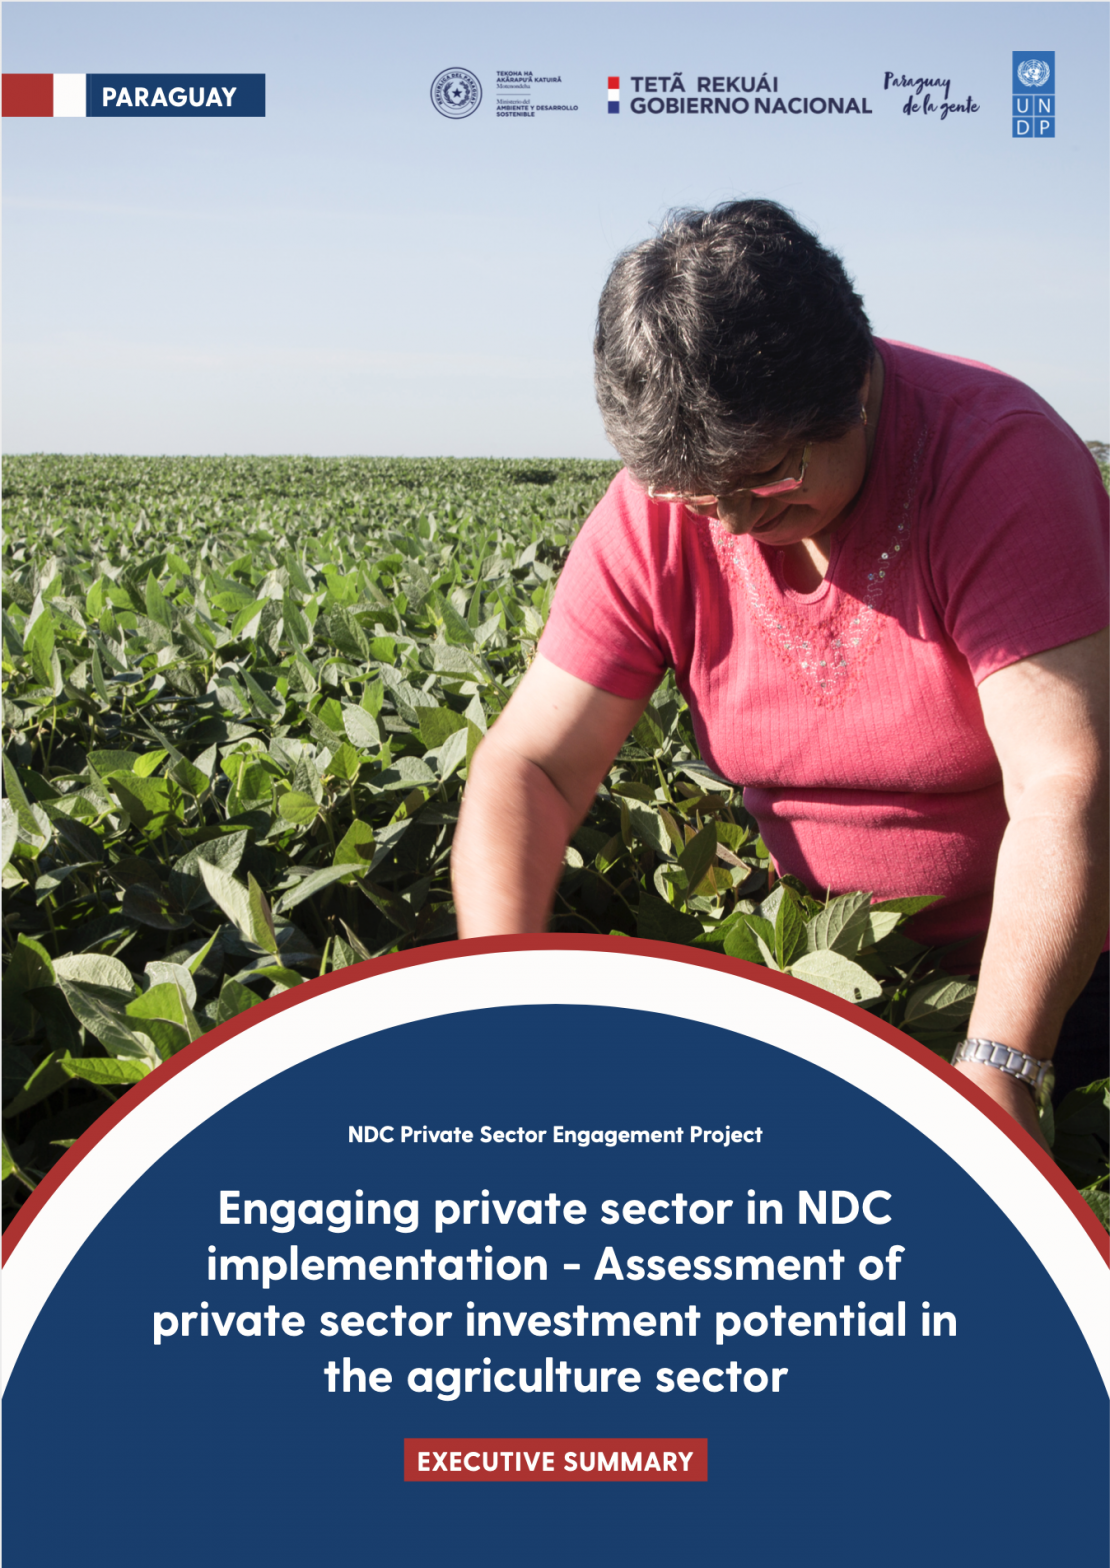 Paraguay private sector investment potential in agriculture sector